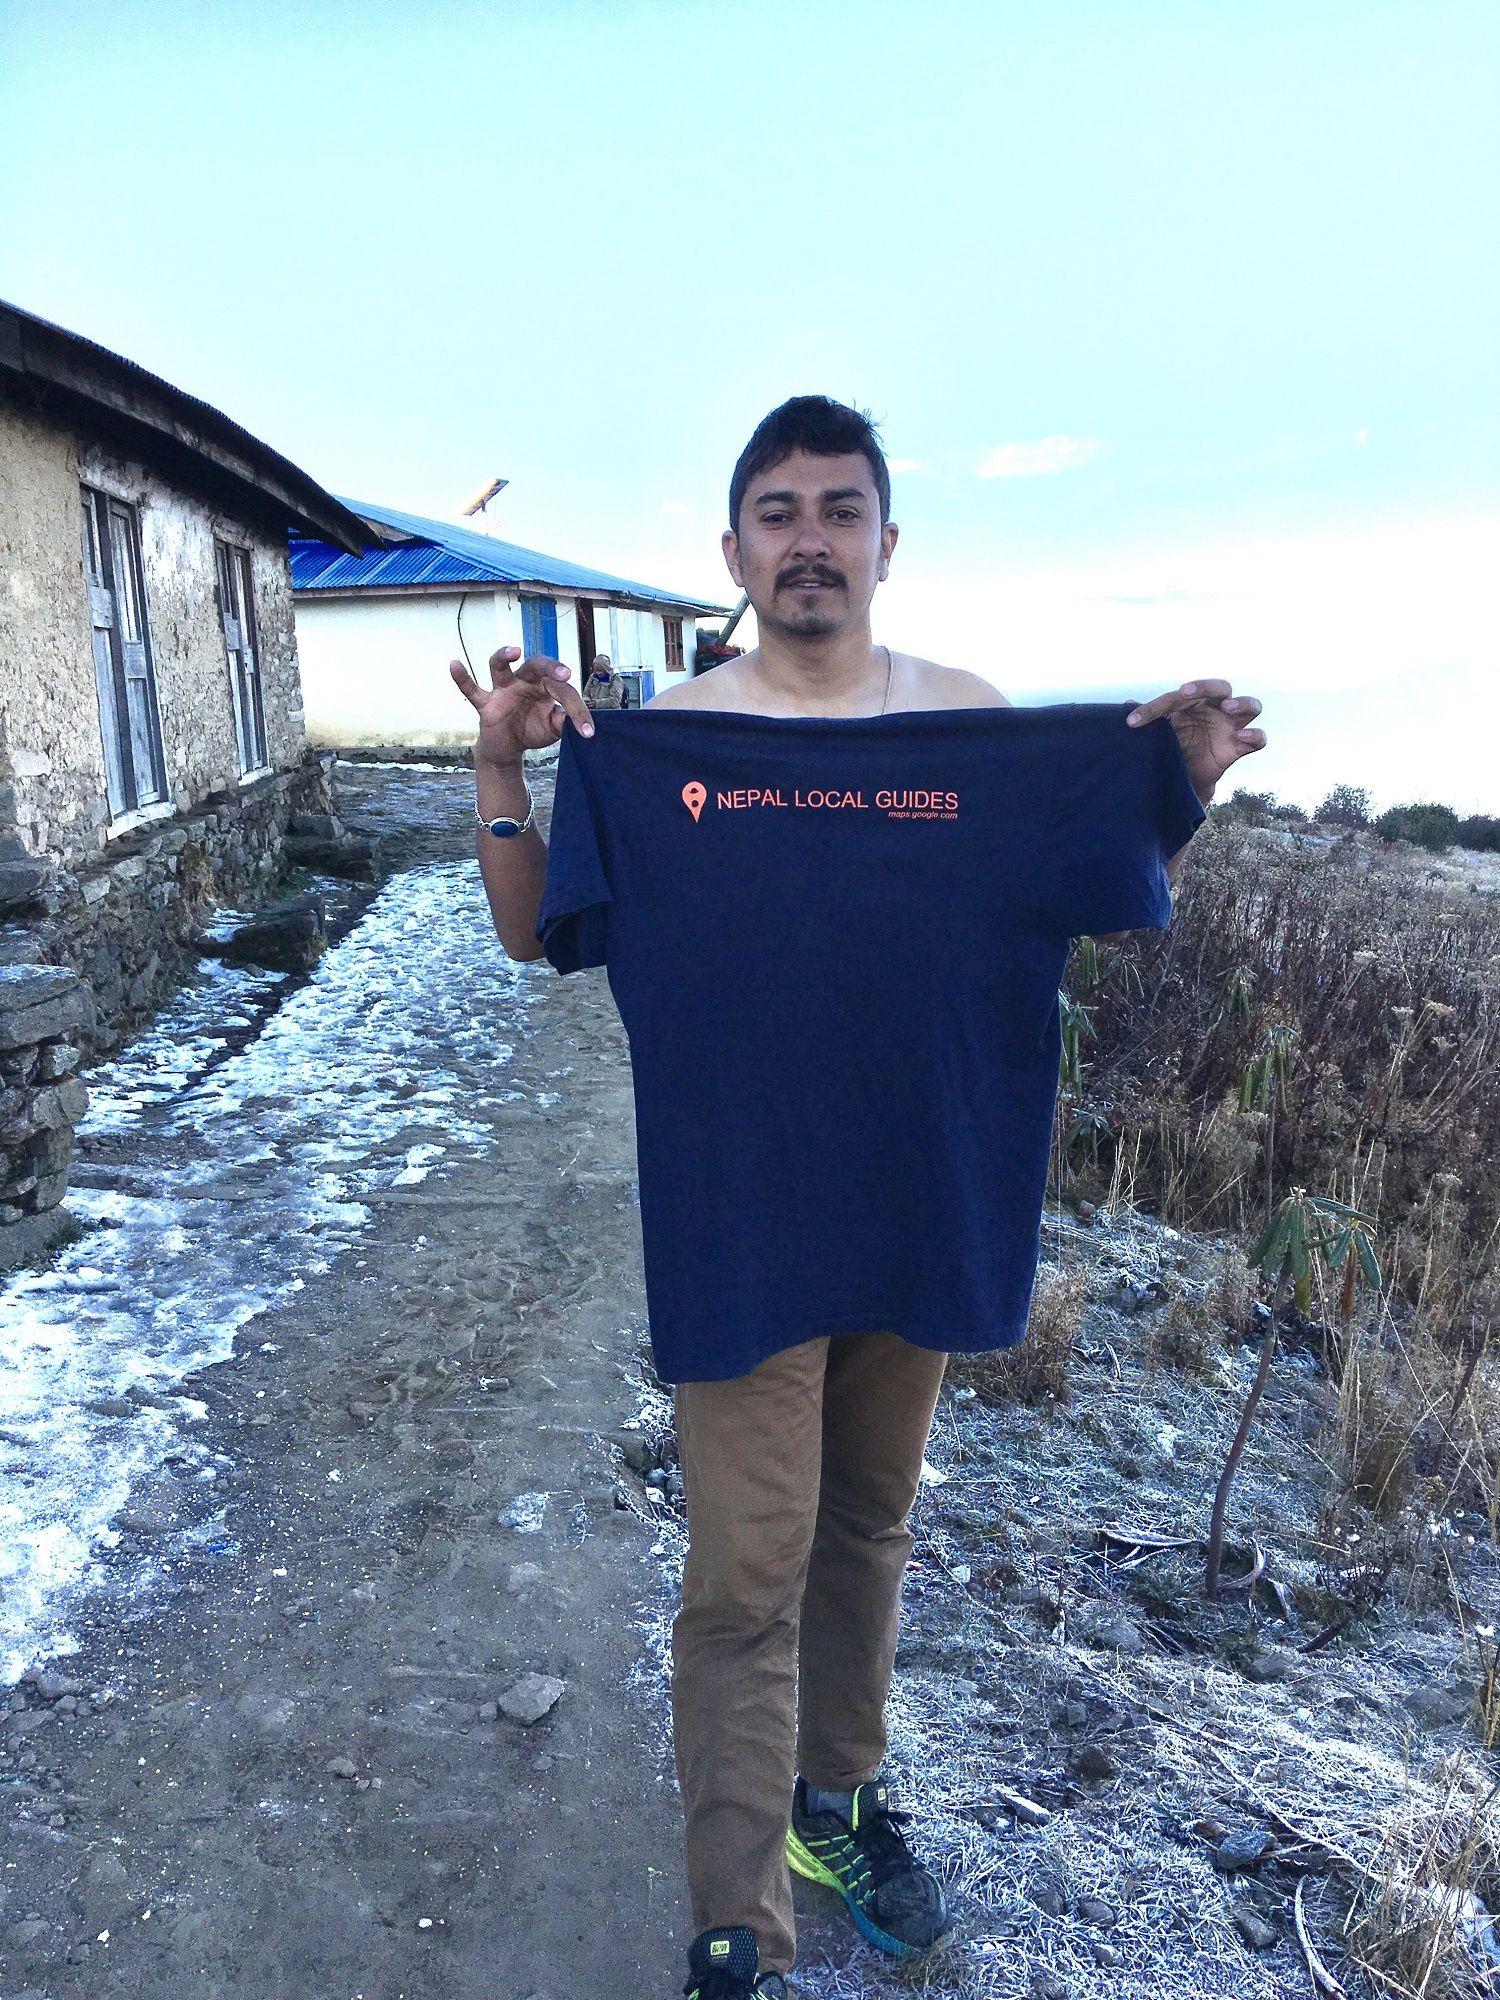 Me: showing Nepal local guide T-shirt, Ice at Back: 4000m (13100ft) from sea level